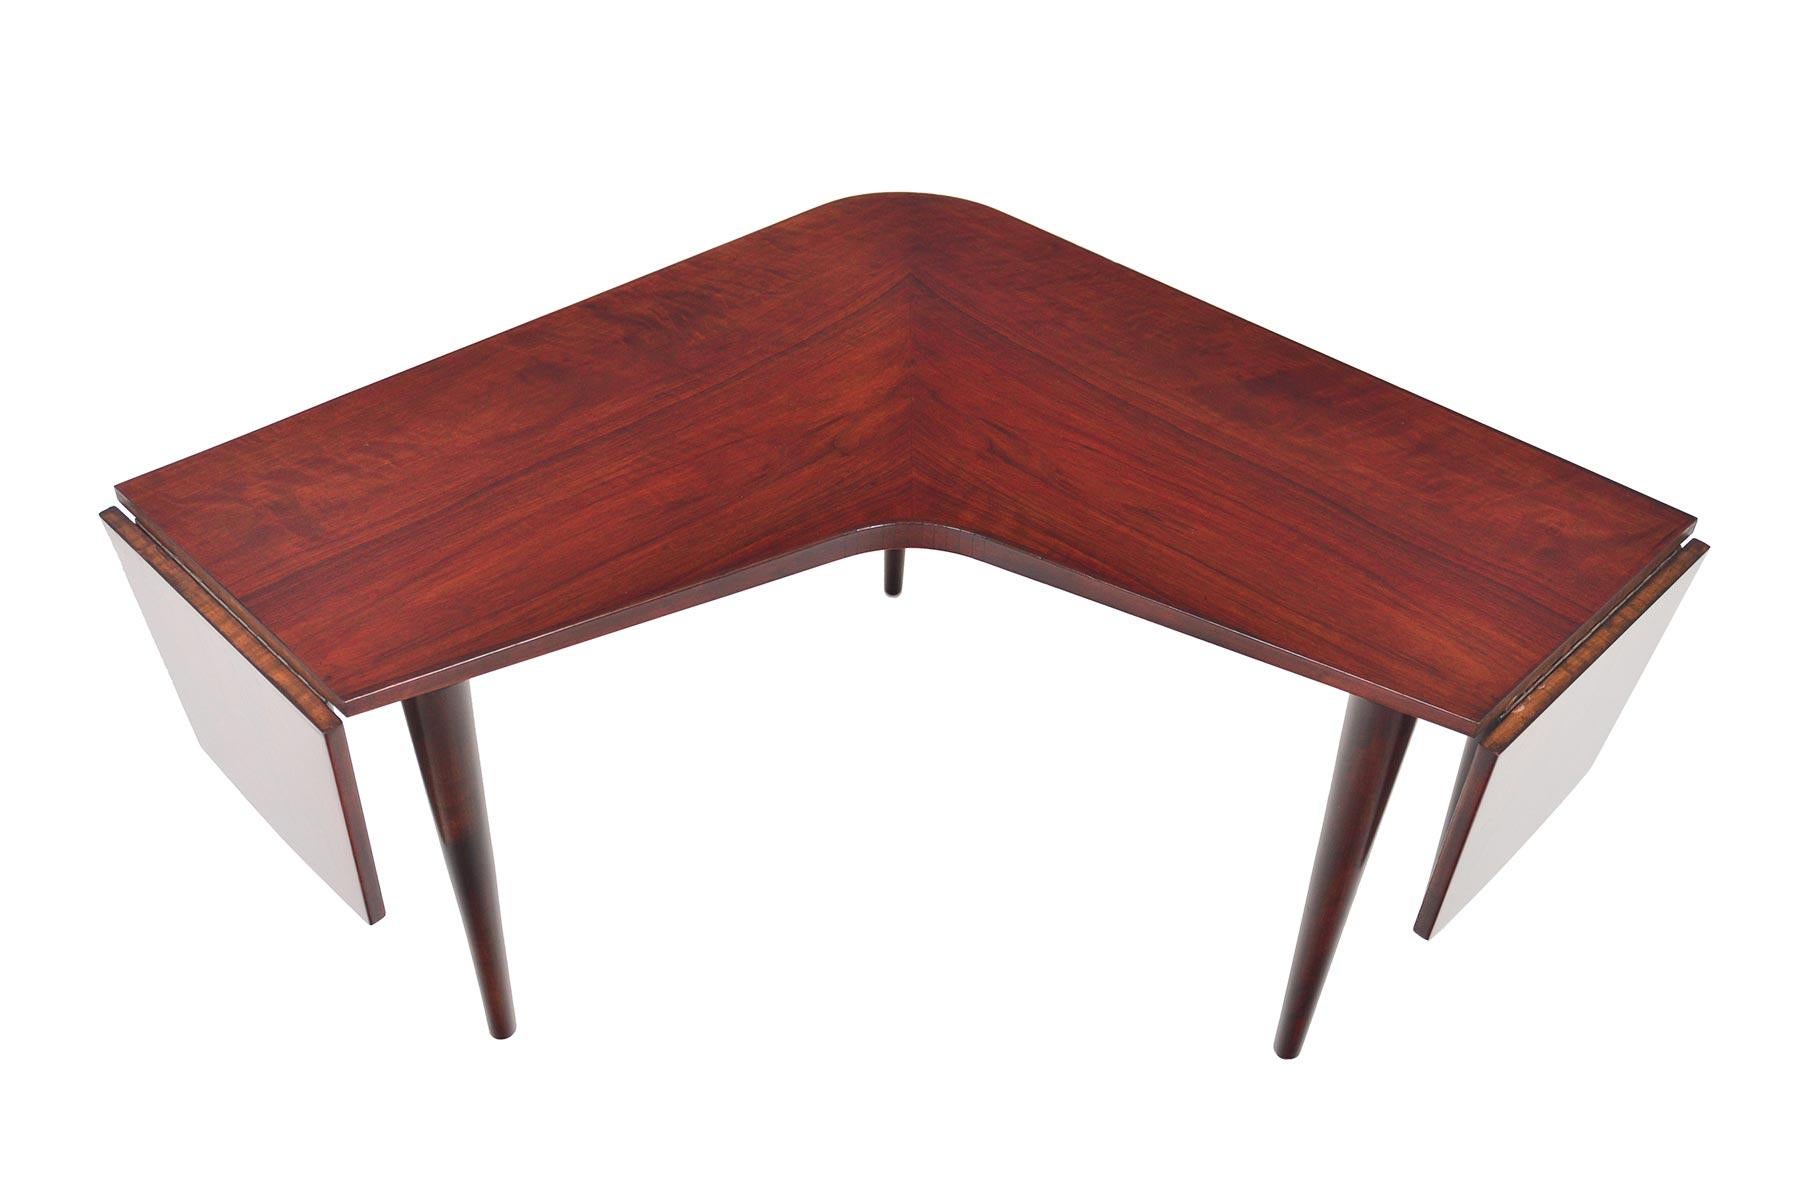 This unusual coffee table was designed by Edvard Valentinsen Møbelfabrik as Model 197 for Series 567 in the 1950s. Beautiful mahogany is formed into a boomerang shape with each end offering a drop leaf extension. Opens to 48